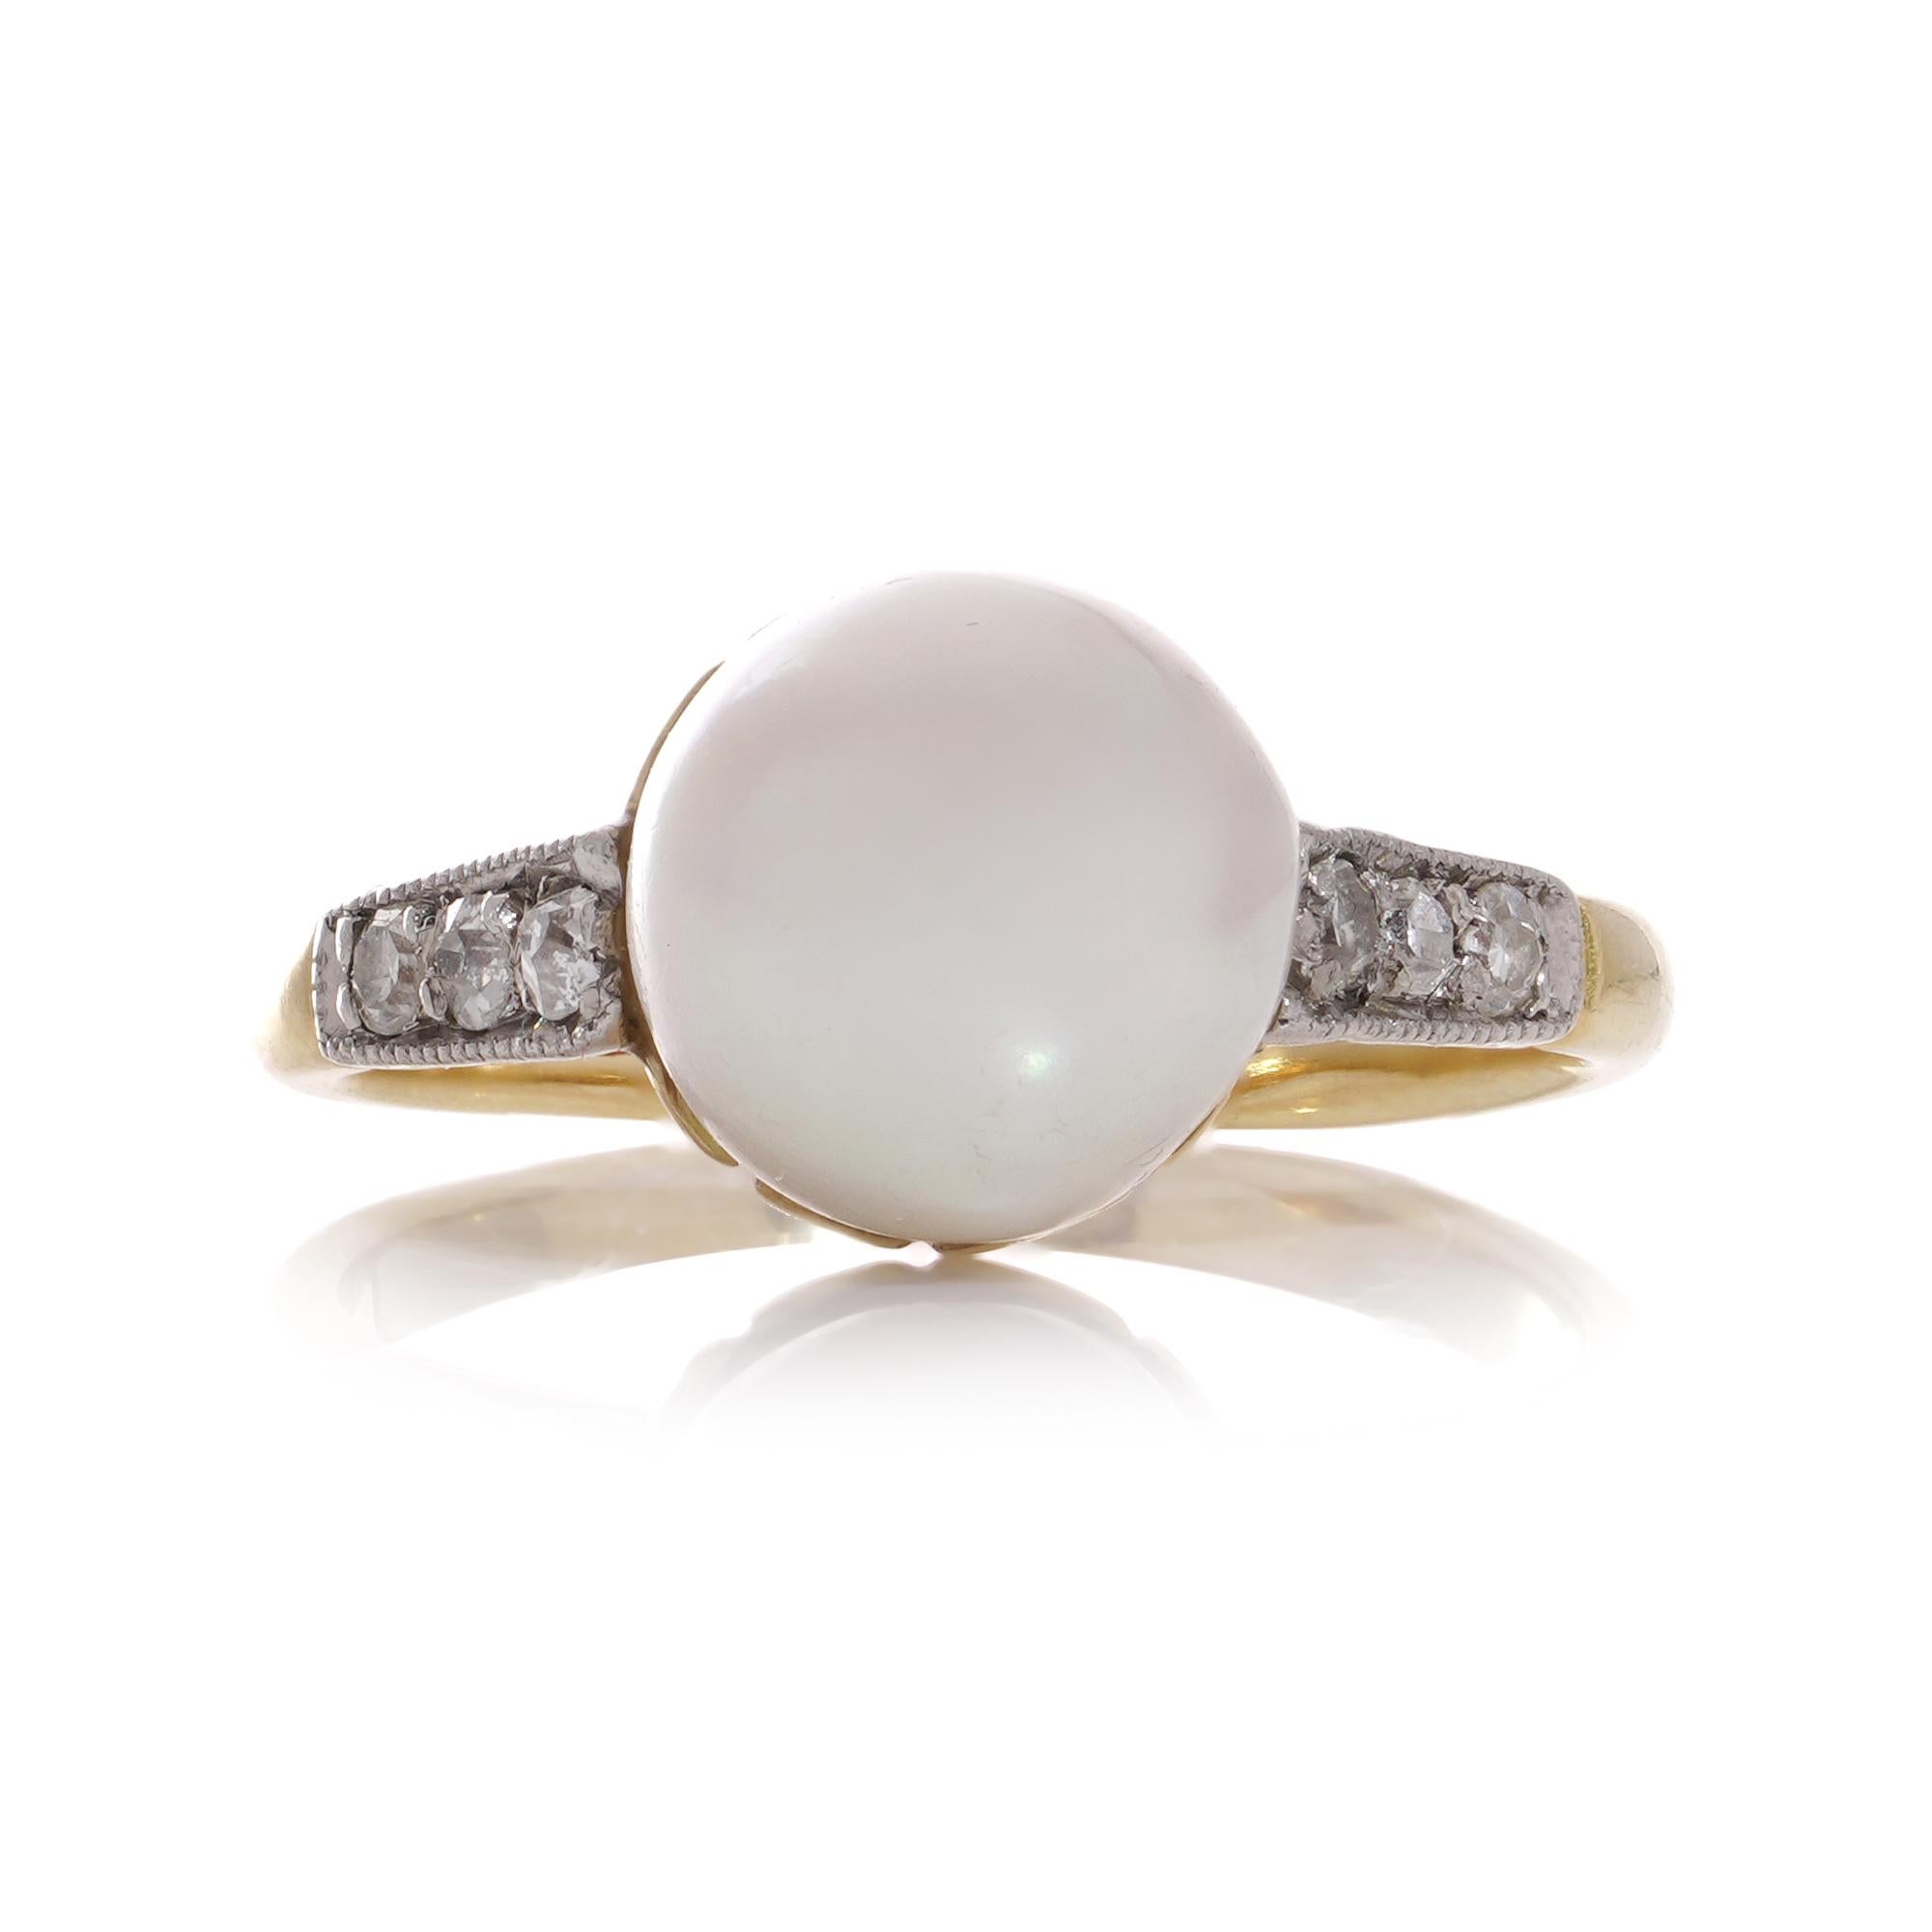 Vintage 18kt. yellow gold and Palladium Cultured Saltwater pearl and Diamond extra small size ring.
Made in Circa 1930-1940s
X-ray has been tested positive for 18kt gold and palladium.

Dimensions -
Ring Size (UK) = E 1/2 (EU) = 43.4 (US) =